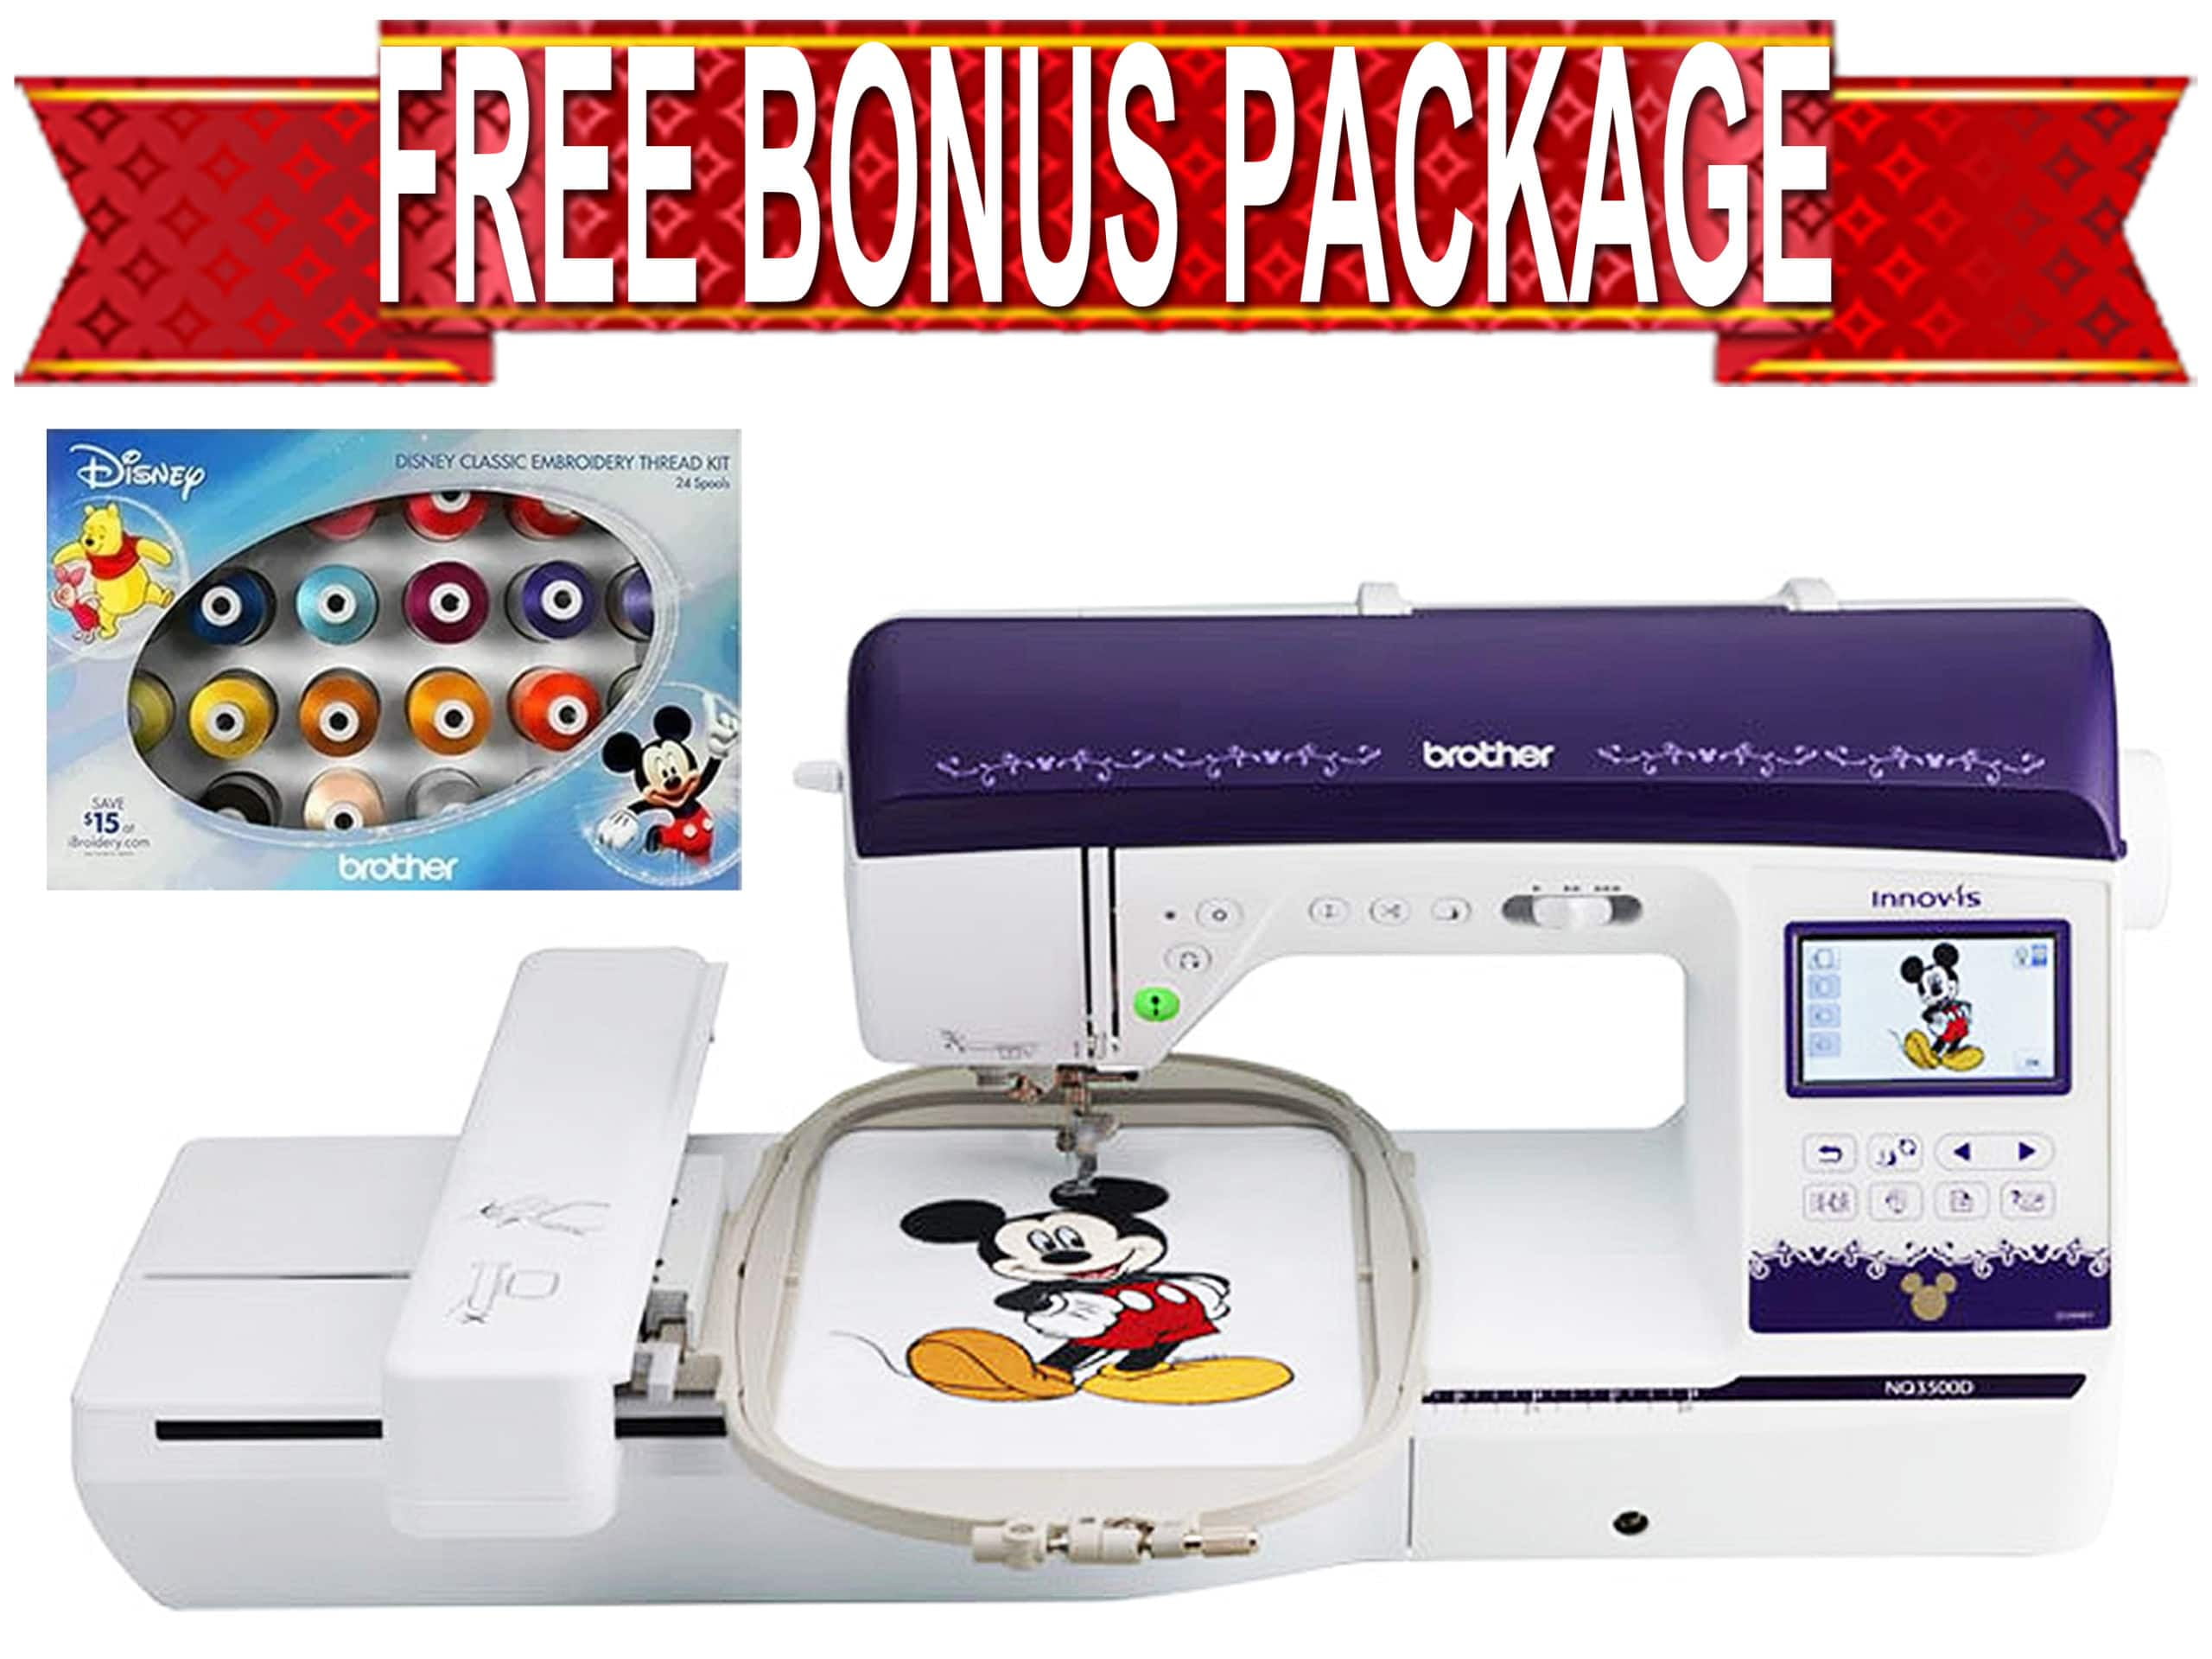 Bernette B79 10 inch x 6 inch Embroidery and Sewing Machine with V9 Creator Software